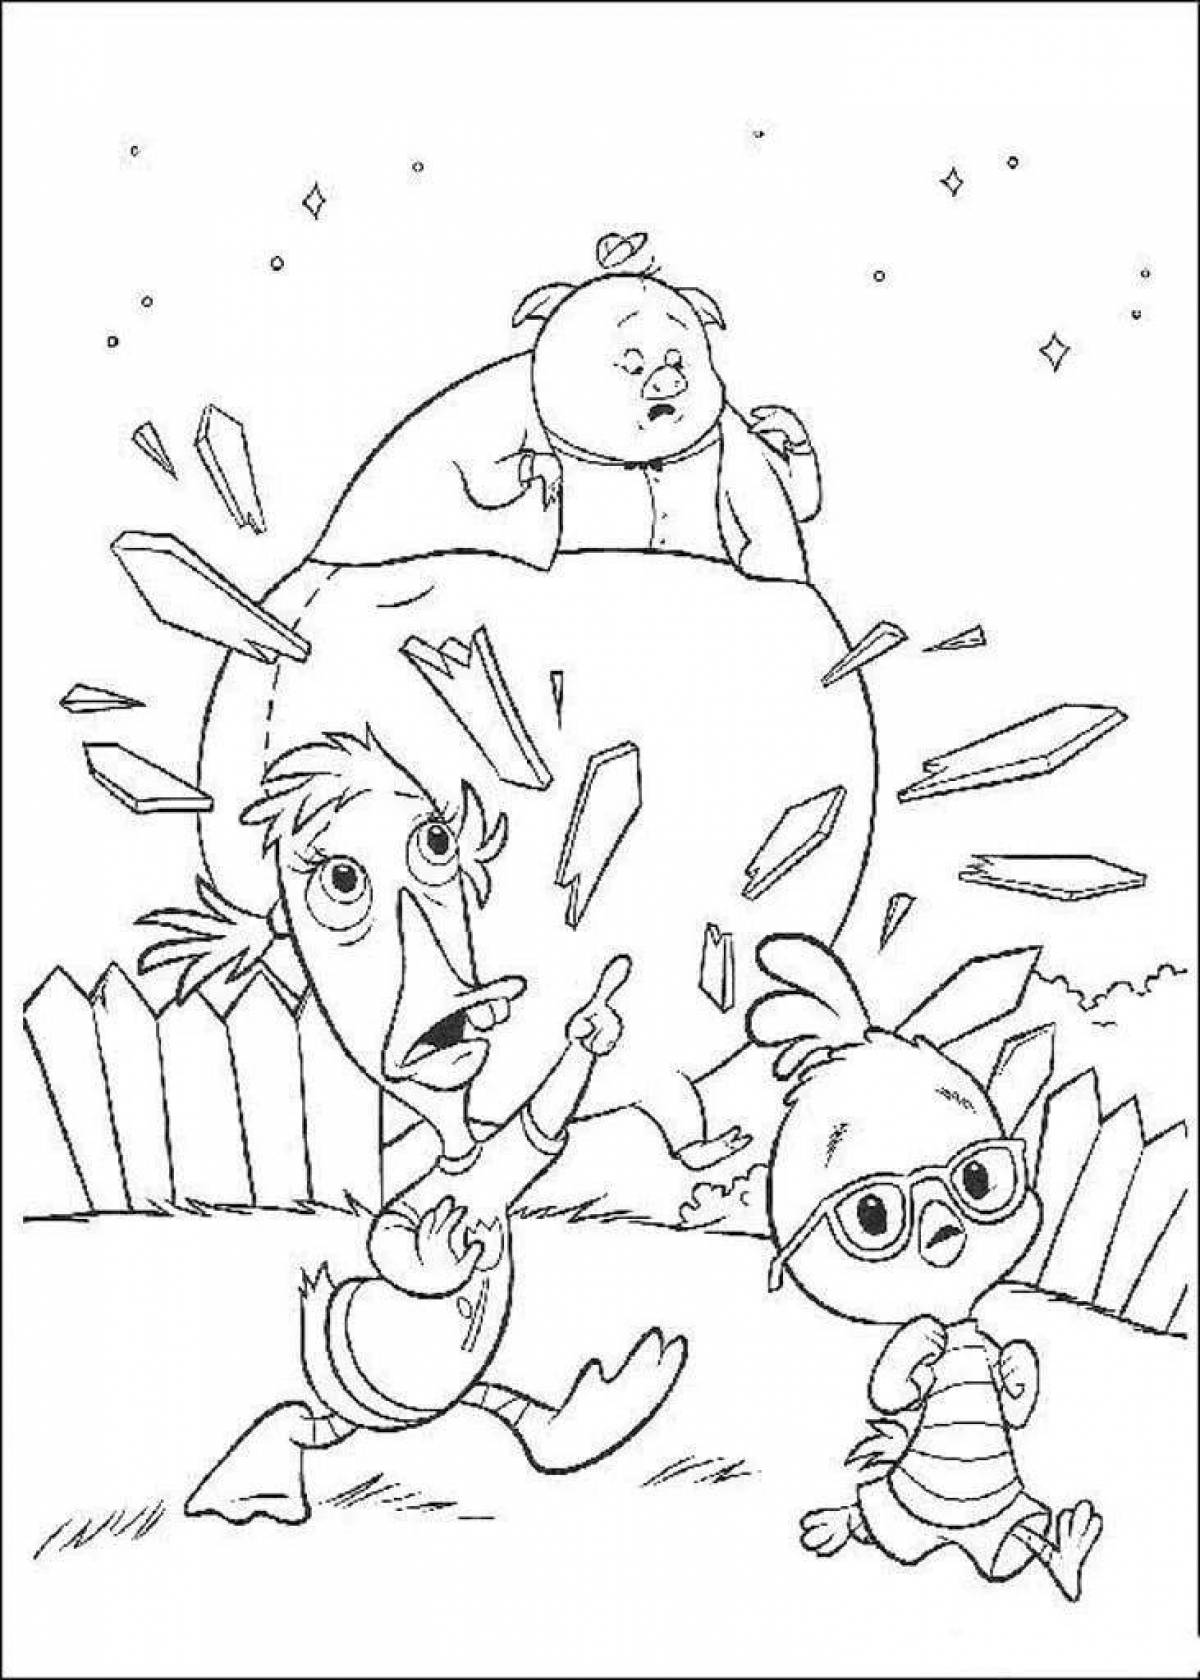 Coloring page funny chick